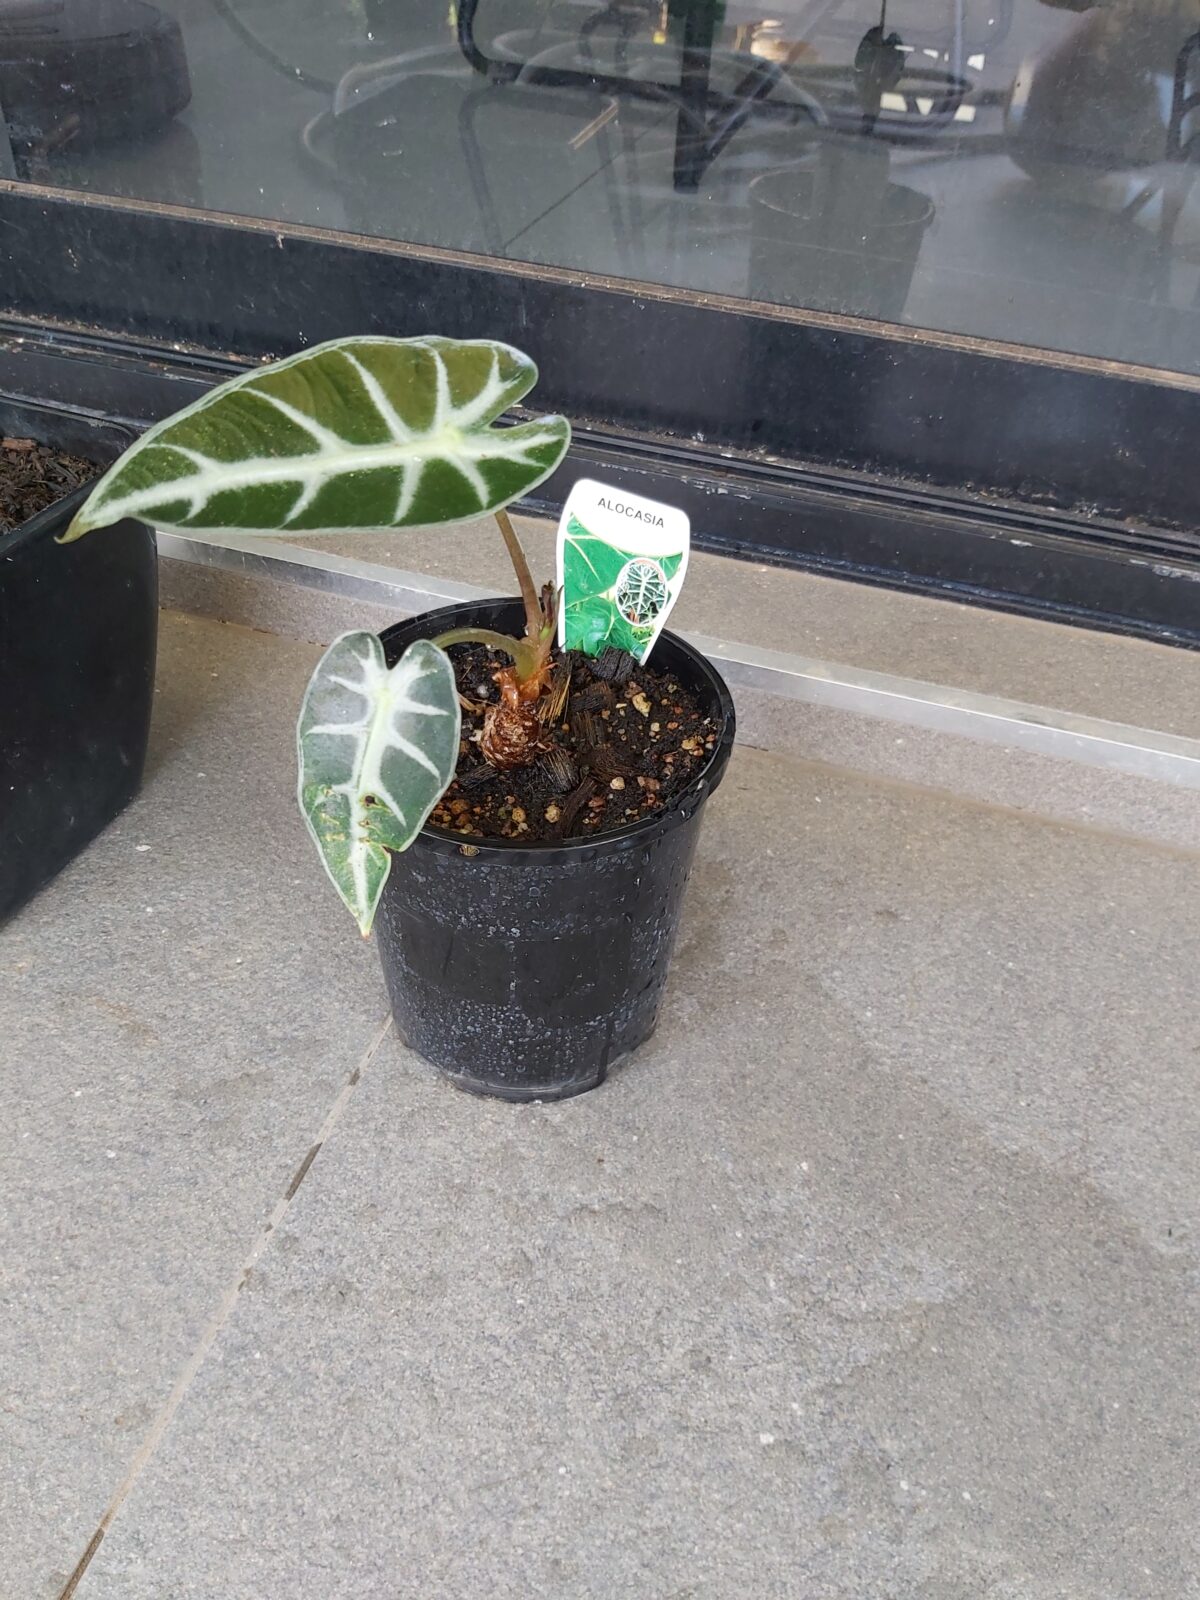 alocasia with two leaves